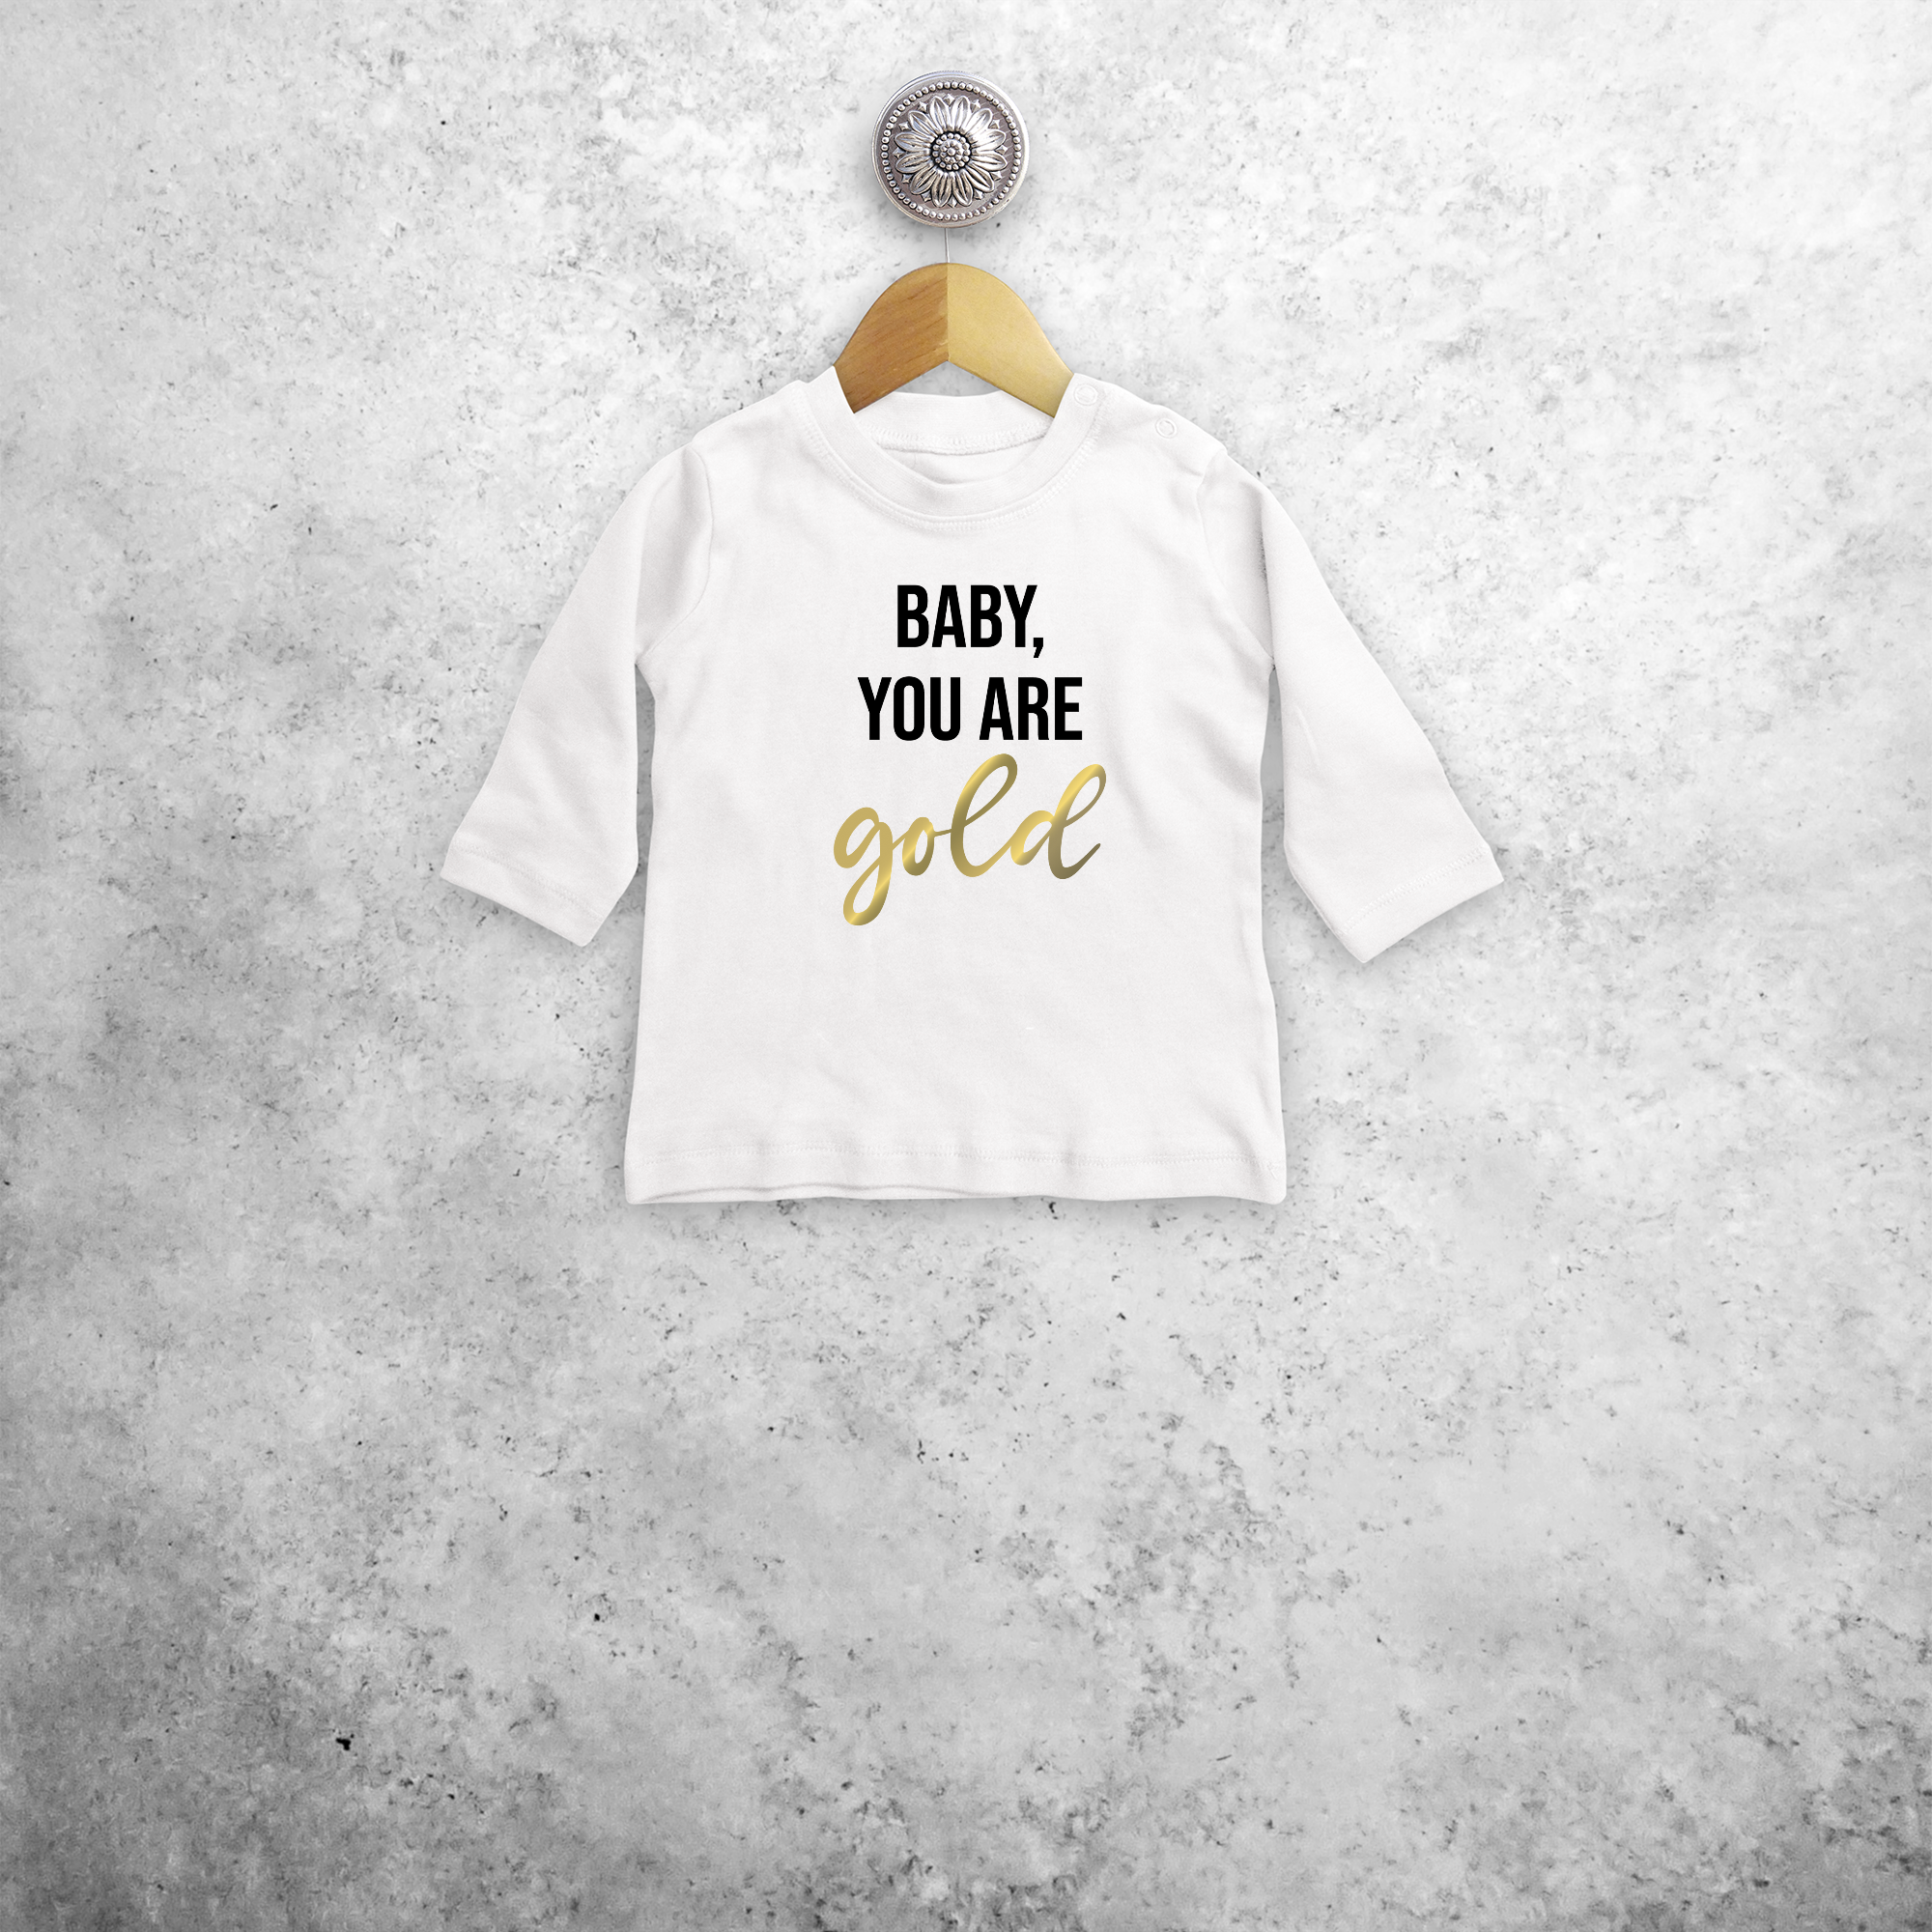 'Baby you are gold' baby longsleeve shirt